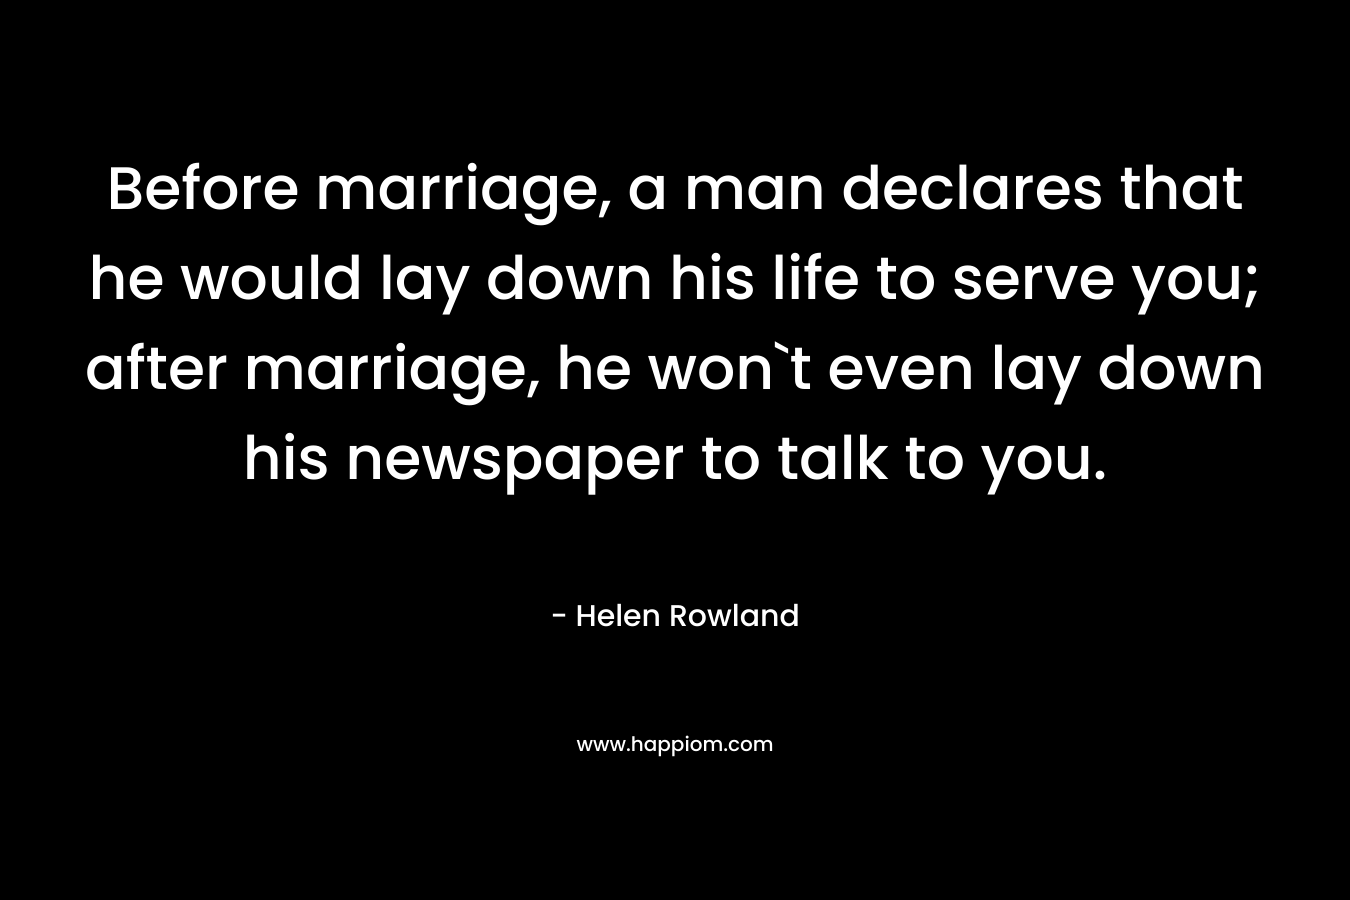 Before marriage, a man declares that he would lay down his life to serve you; after marriage, he won`t even lay down his newspaper to talk to you.